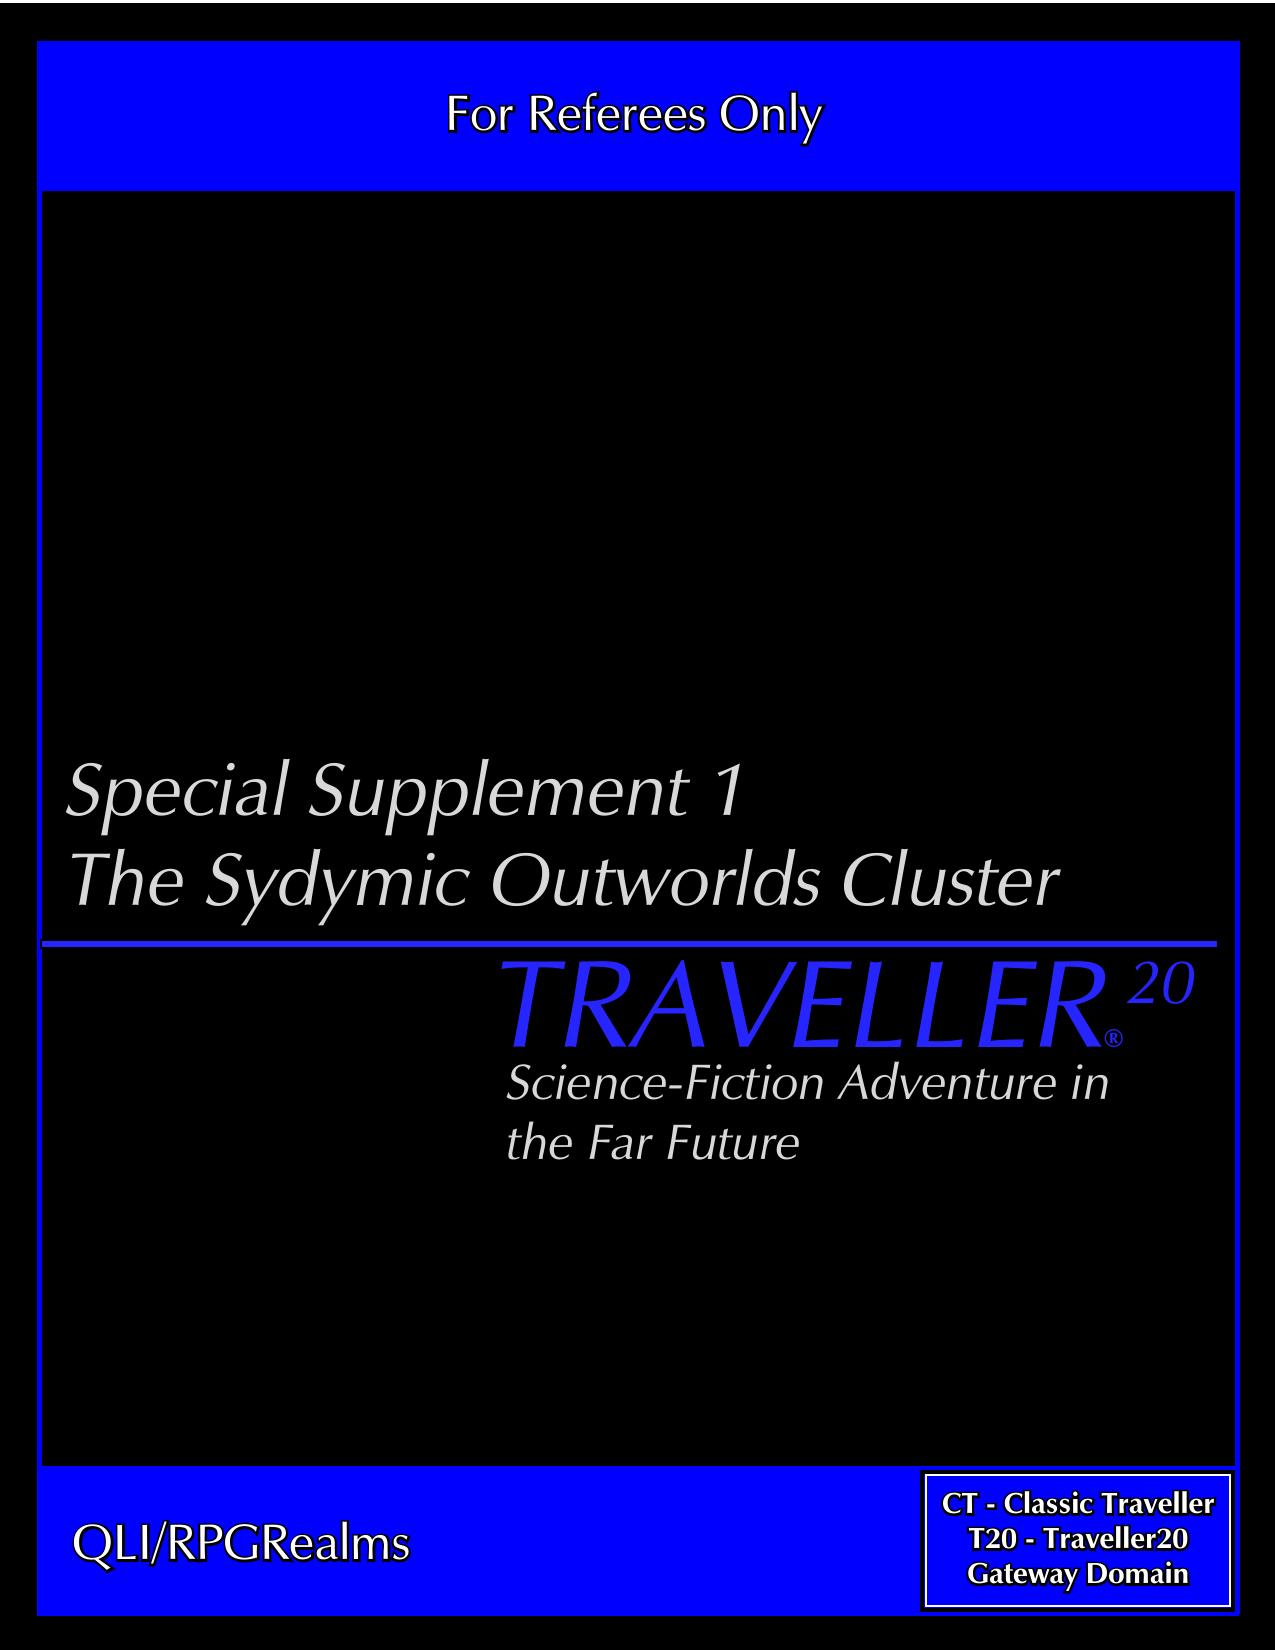 Special Supplement 01- The Sydmymic Outworlds Cluster